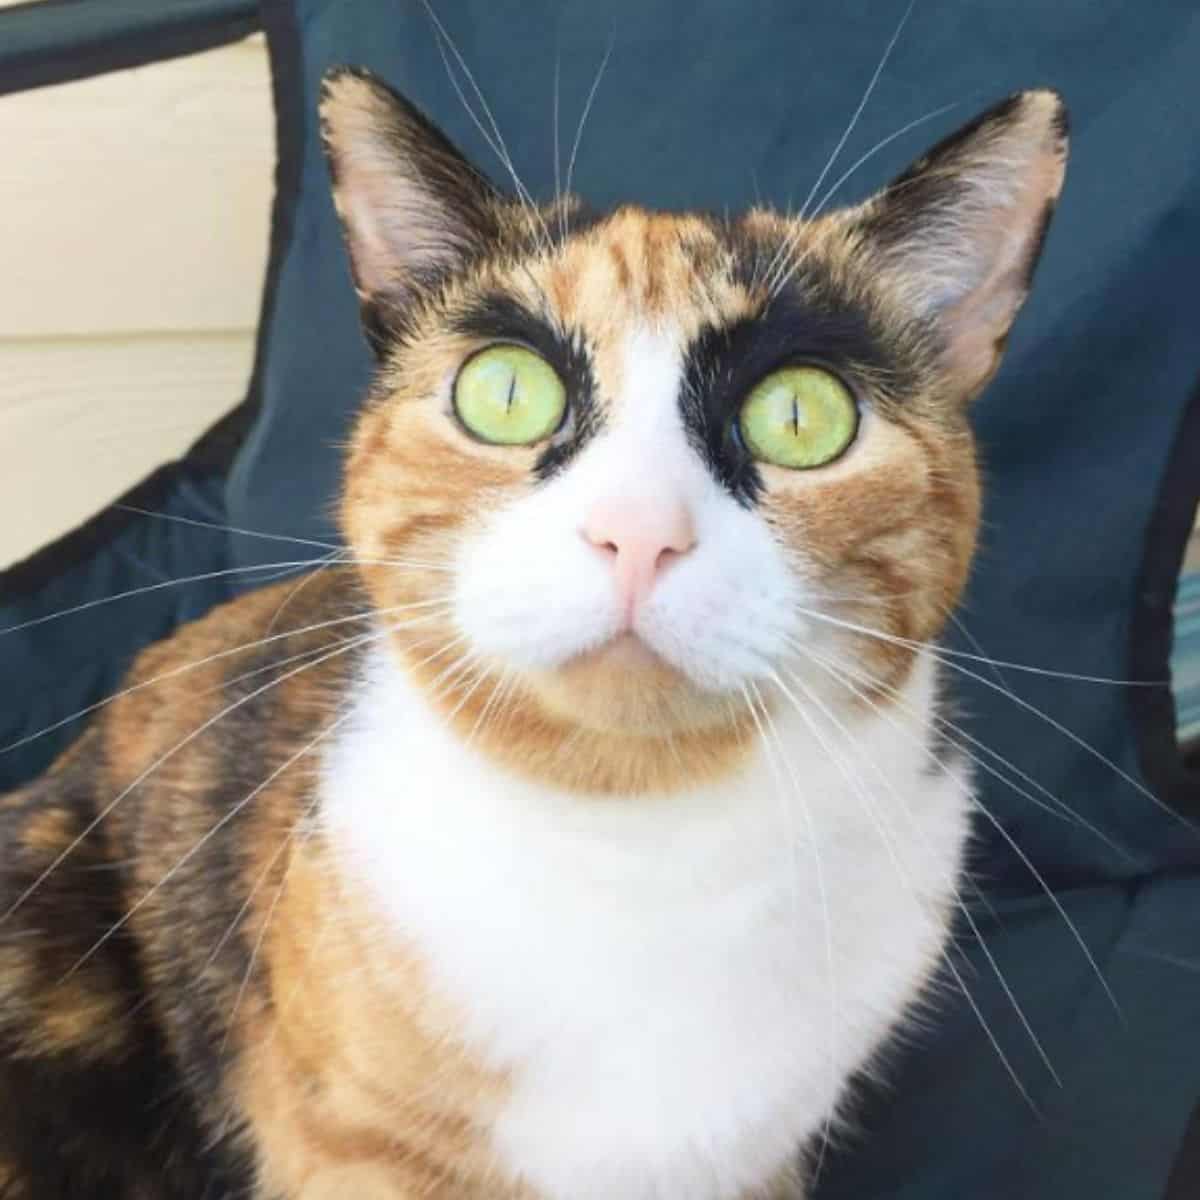 a cat with the most unusual eyebrows surprisingly looks at the camera